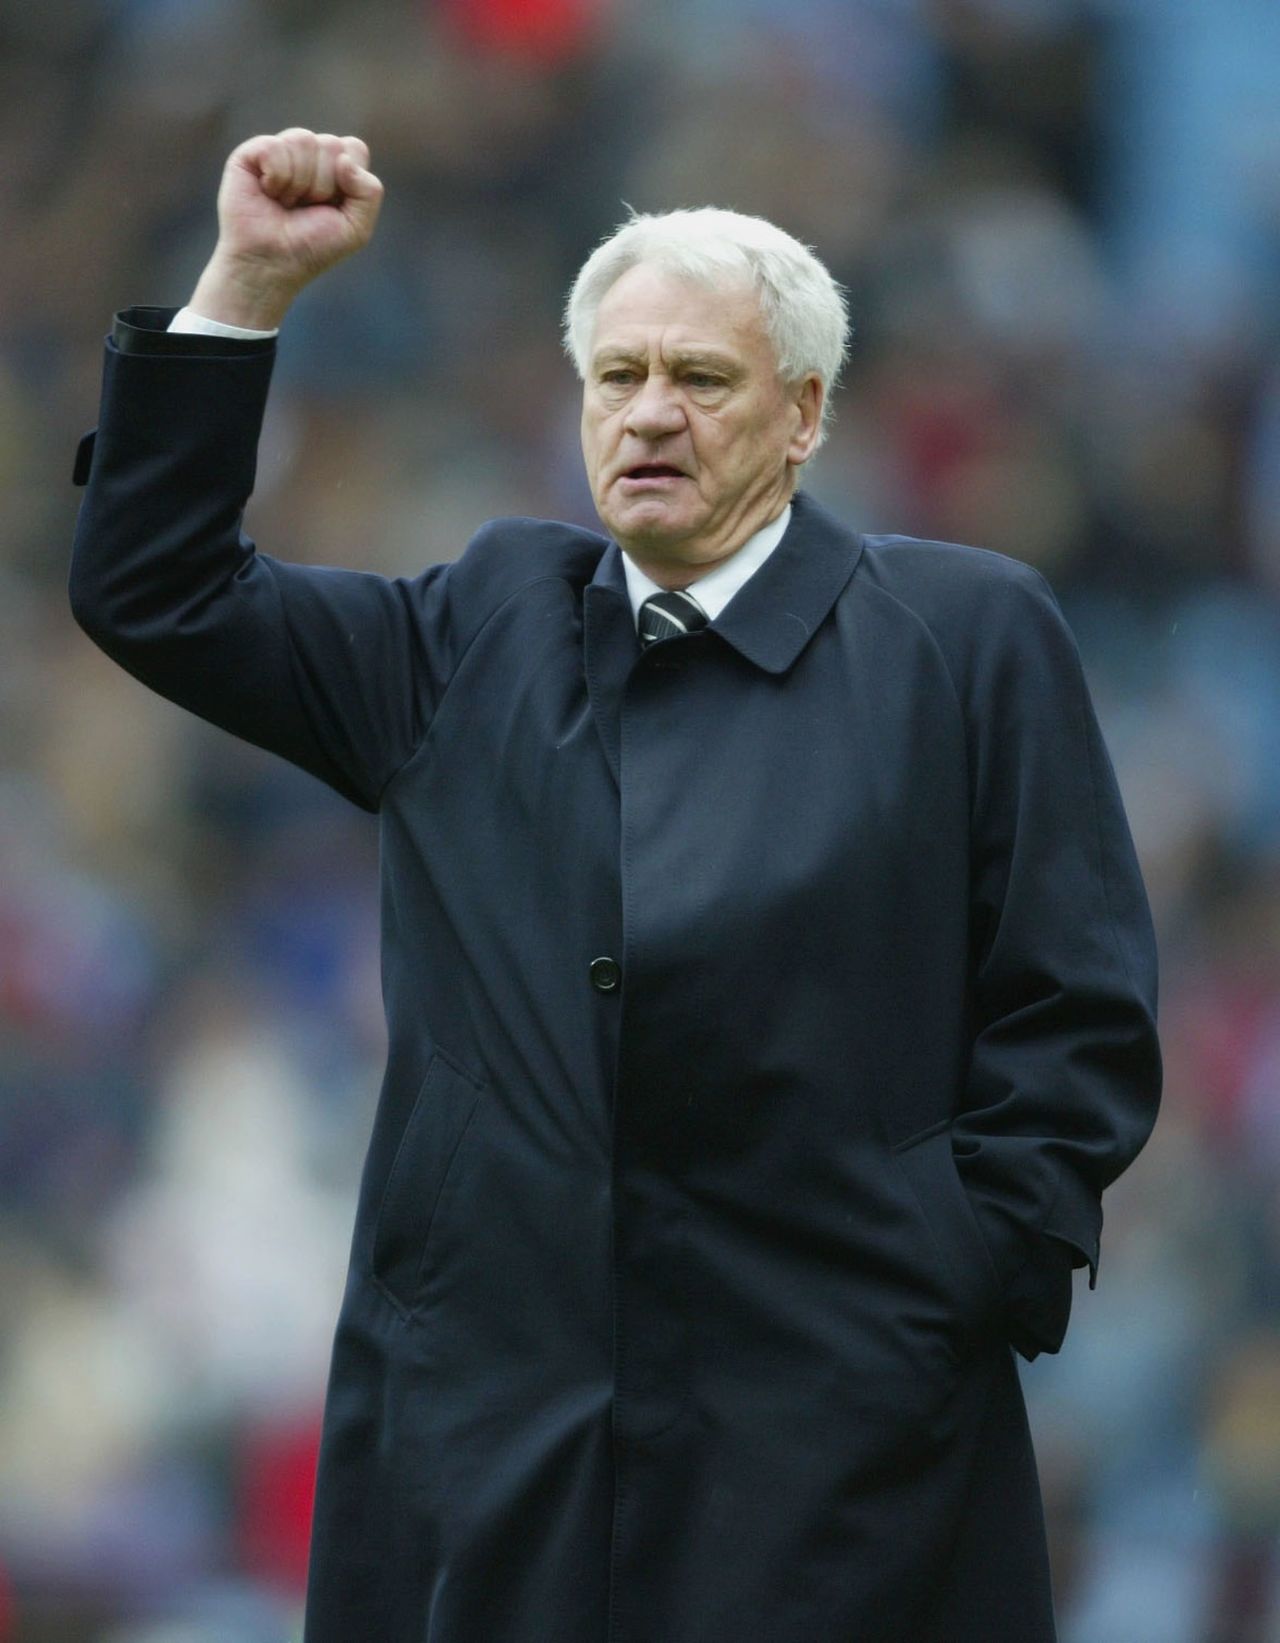 It is a far cry from days gone by when Newcastle were known as "The Entertainers" under Kevin Keegan and came agonizingly close to winning the Premier League in 1996. More recently, the late Sir Bobby Robson led them into the European Champions League in the 2002-03 season.